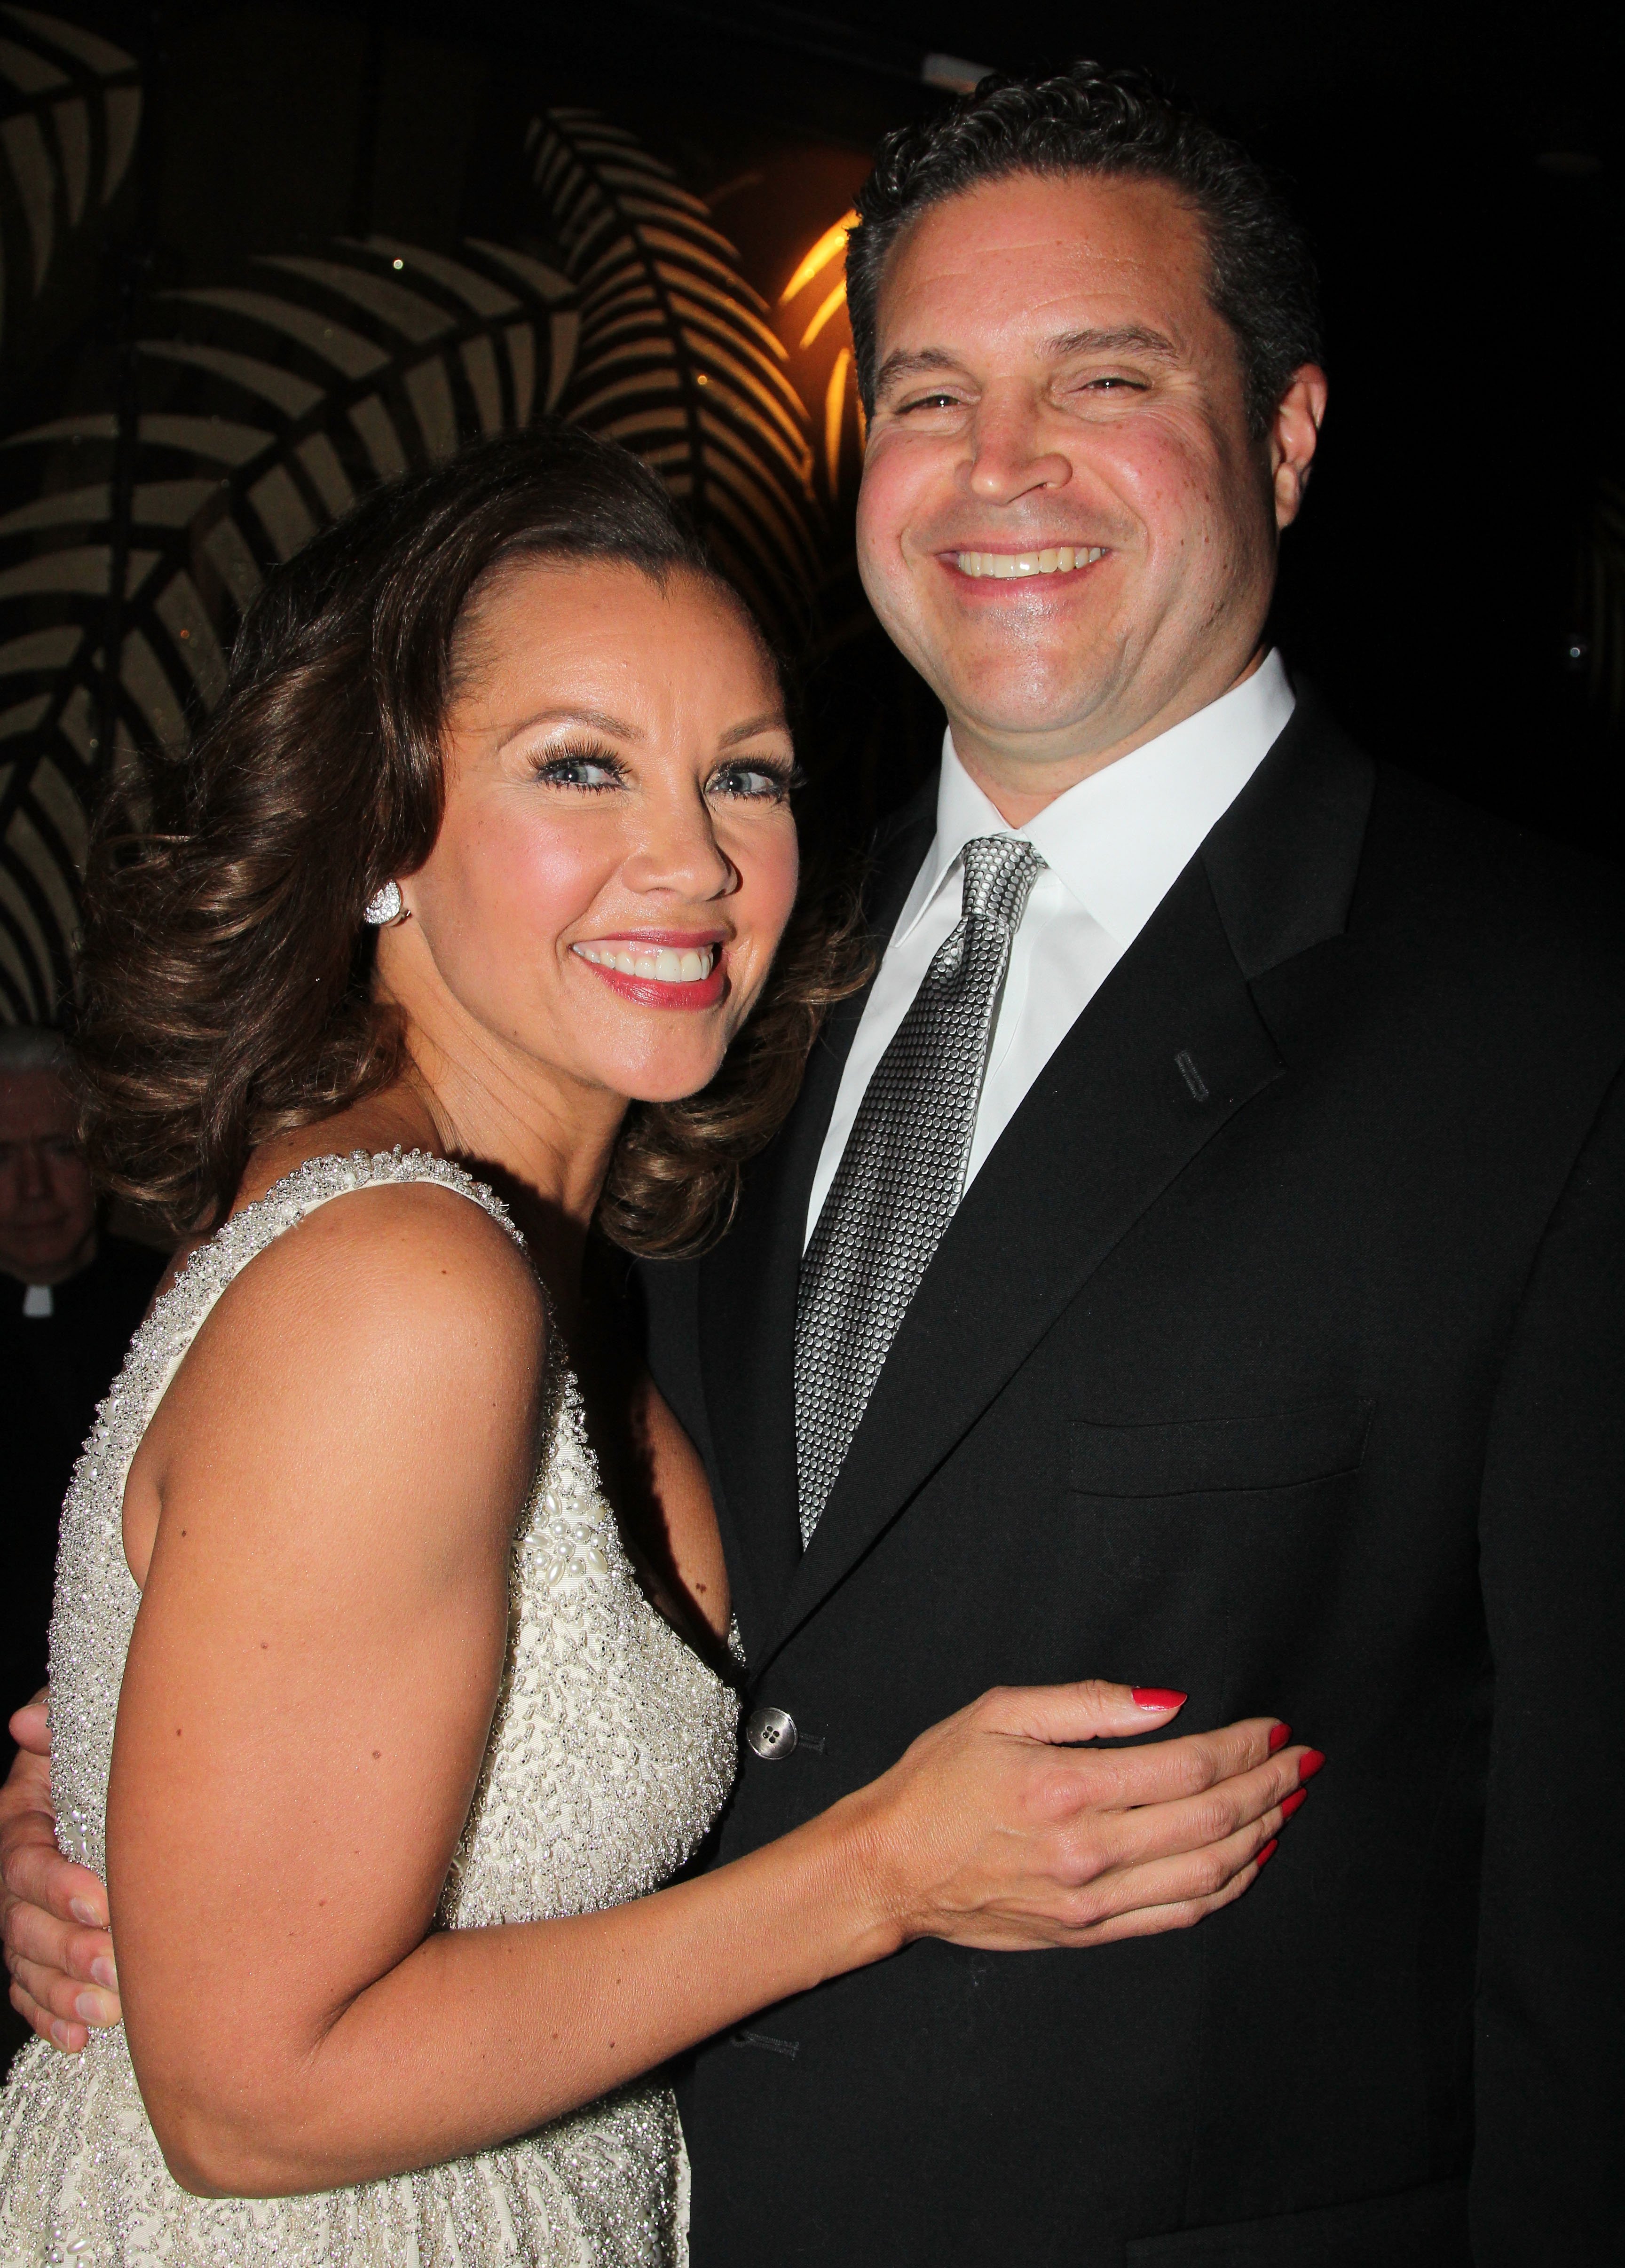 Vanessa Williams and her husband businessman Jim Skrip during the after party for the Broadway opening night of "The Trip To Bountiful" at The Copacabana on April 23, 2013 in New York City. / Source: Getty Images